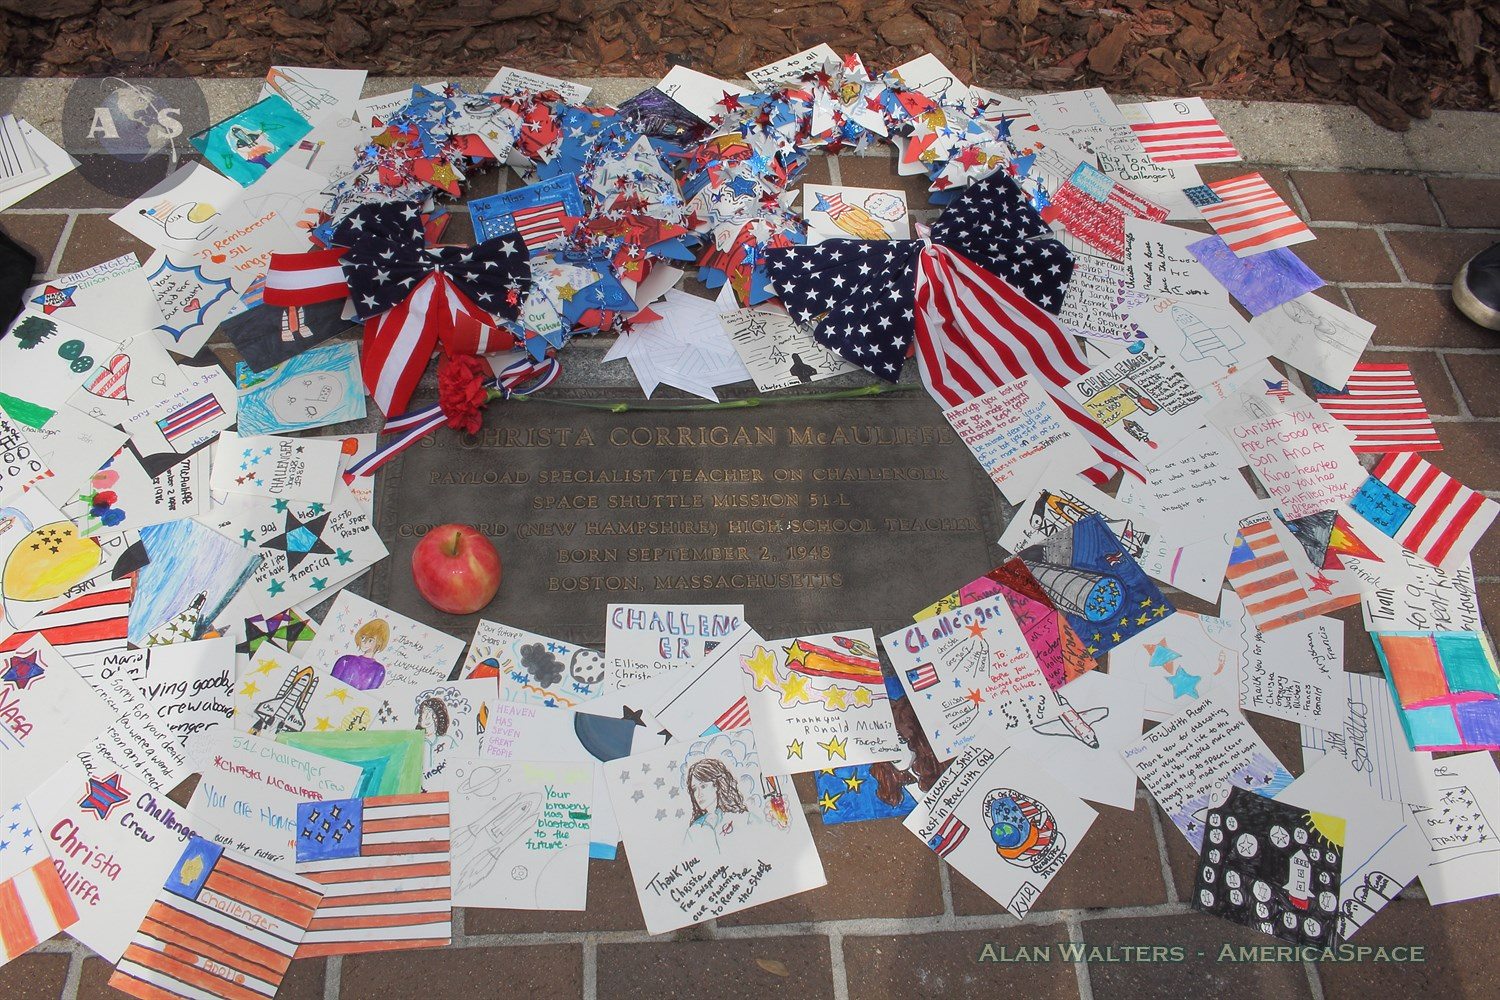 Christa McAuliffe's plaque received the gift of schoolchildren's notes. Photo Credit: Alan Walters / AmericaSpace